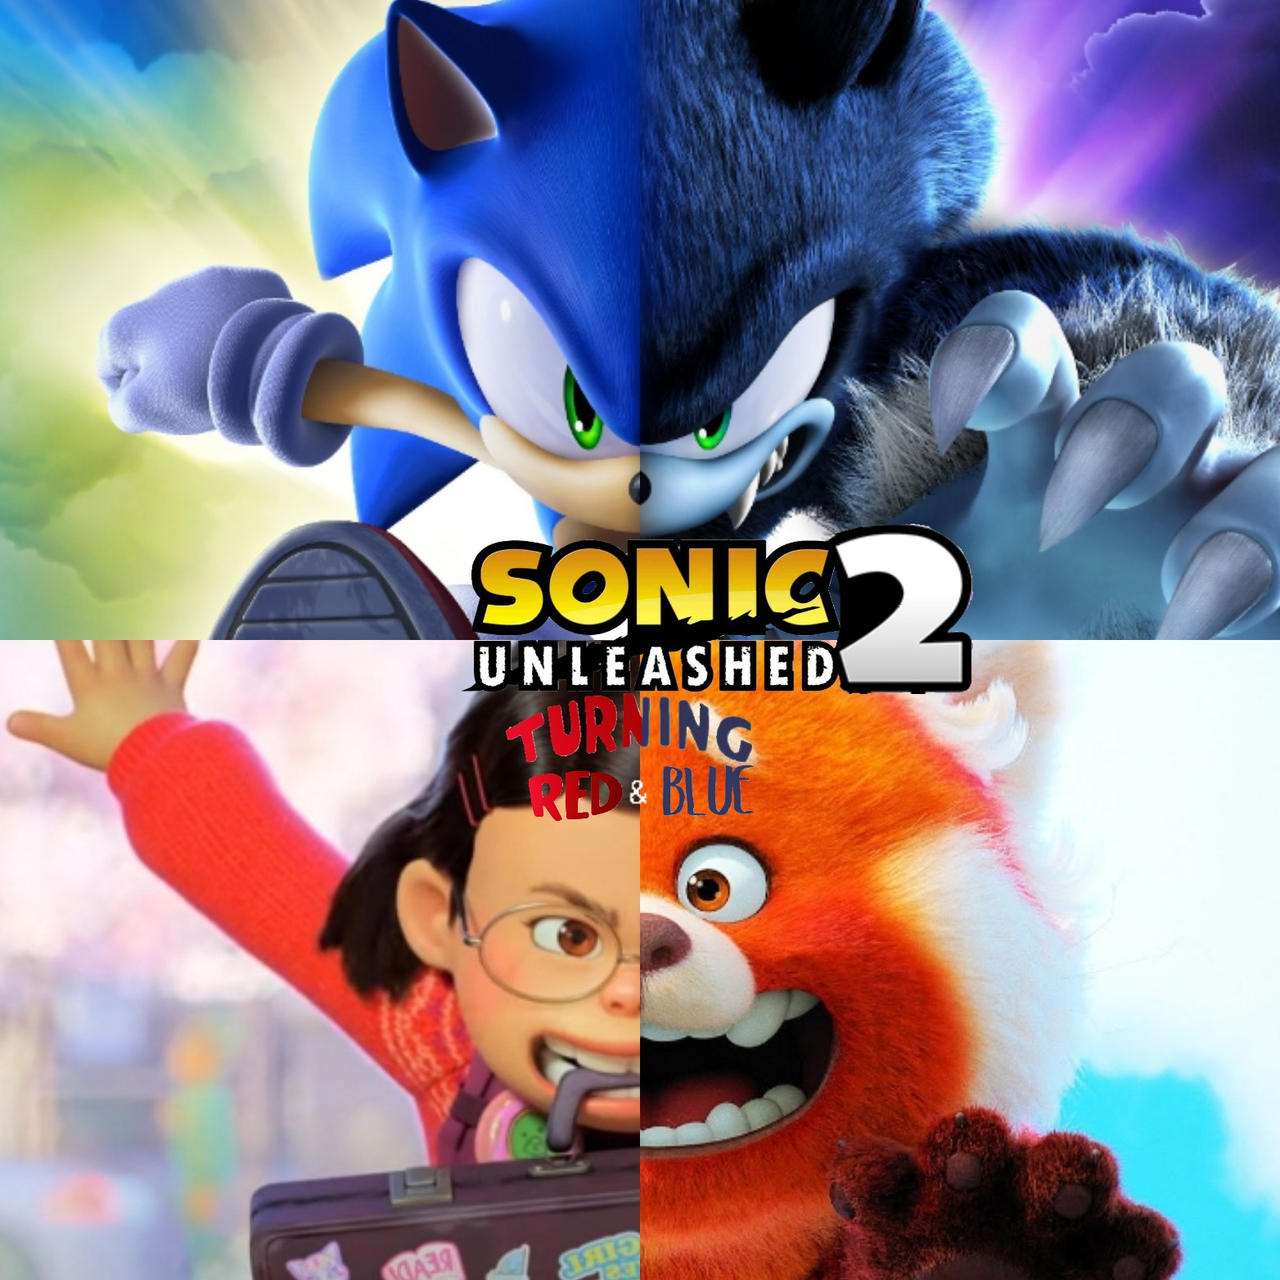 Sonic Unleashed 2Turning Red and Blue by KidSonic2001 on DeviantArt